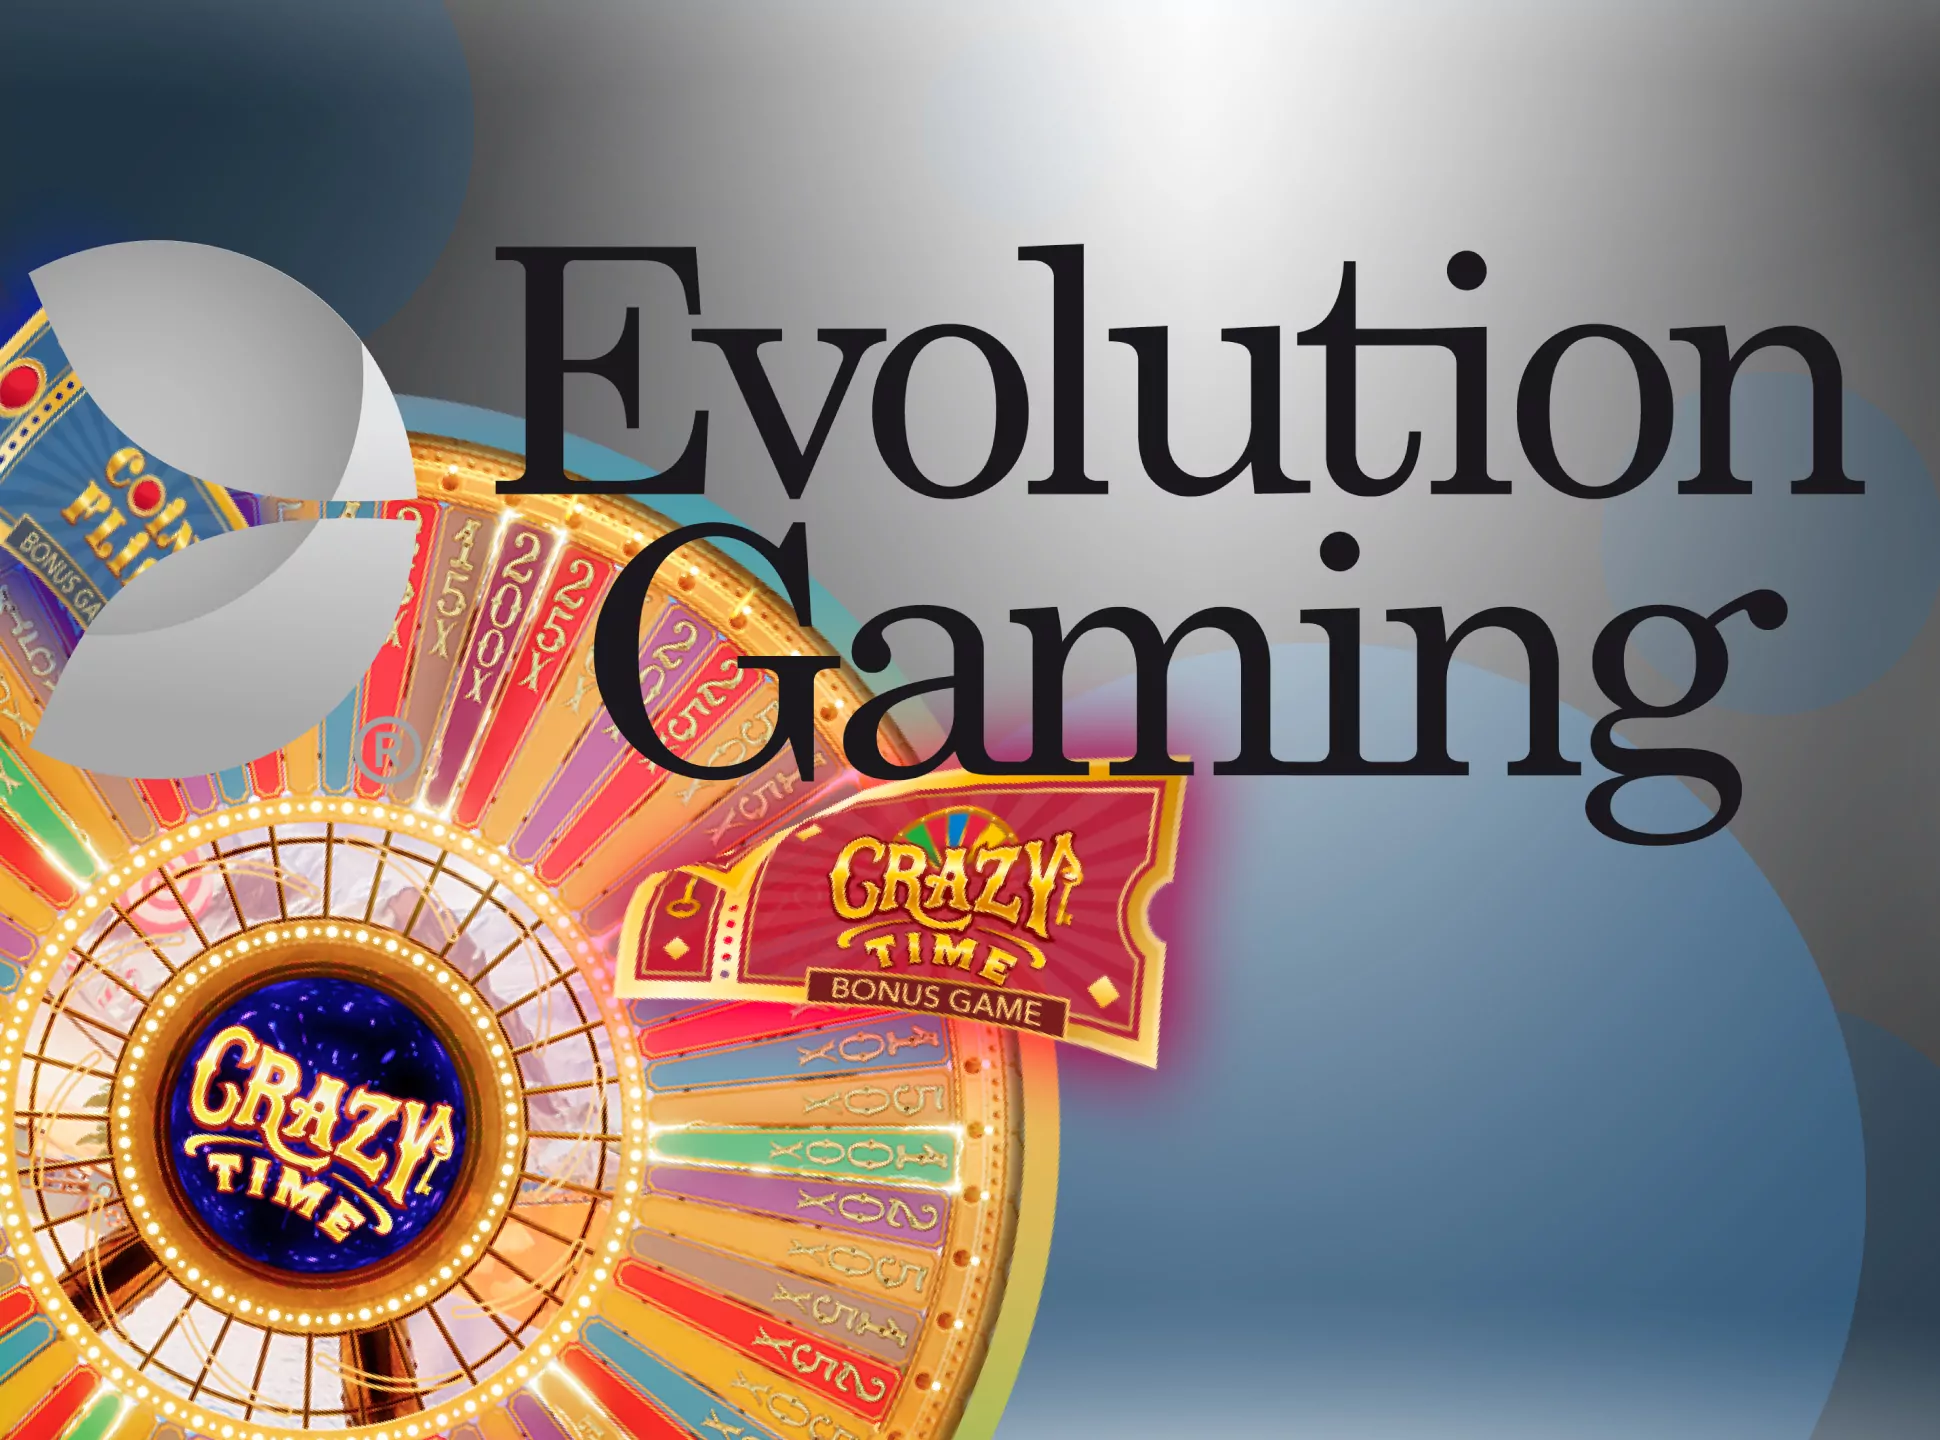 Mostbet app has a lot of casino games from the Evolution Gaming.